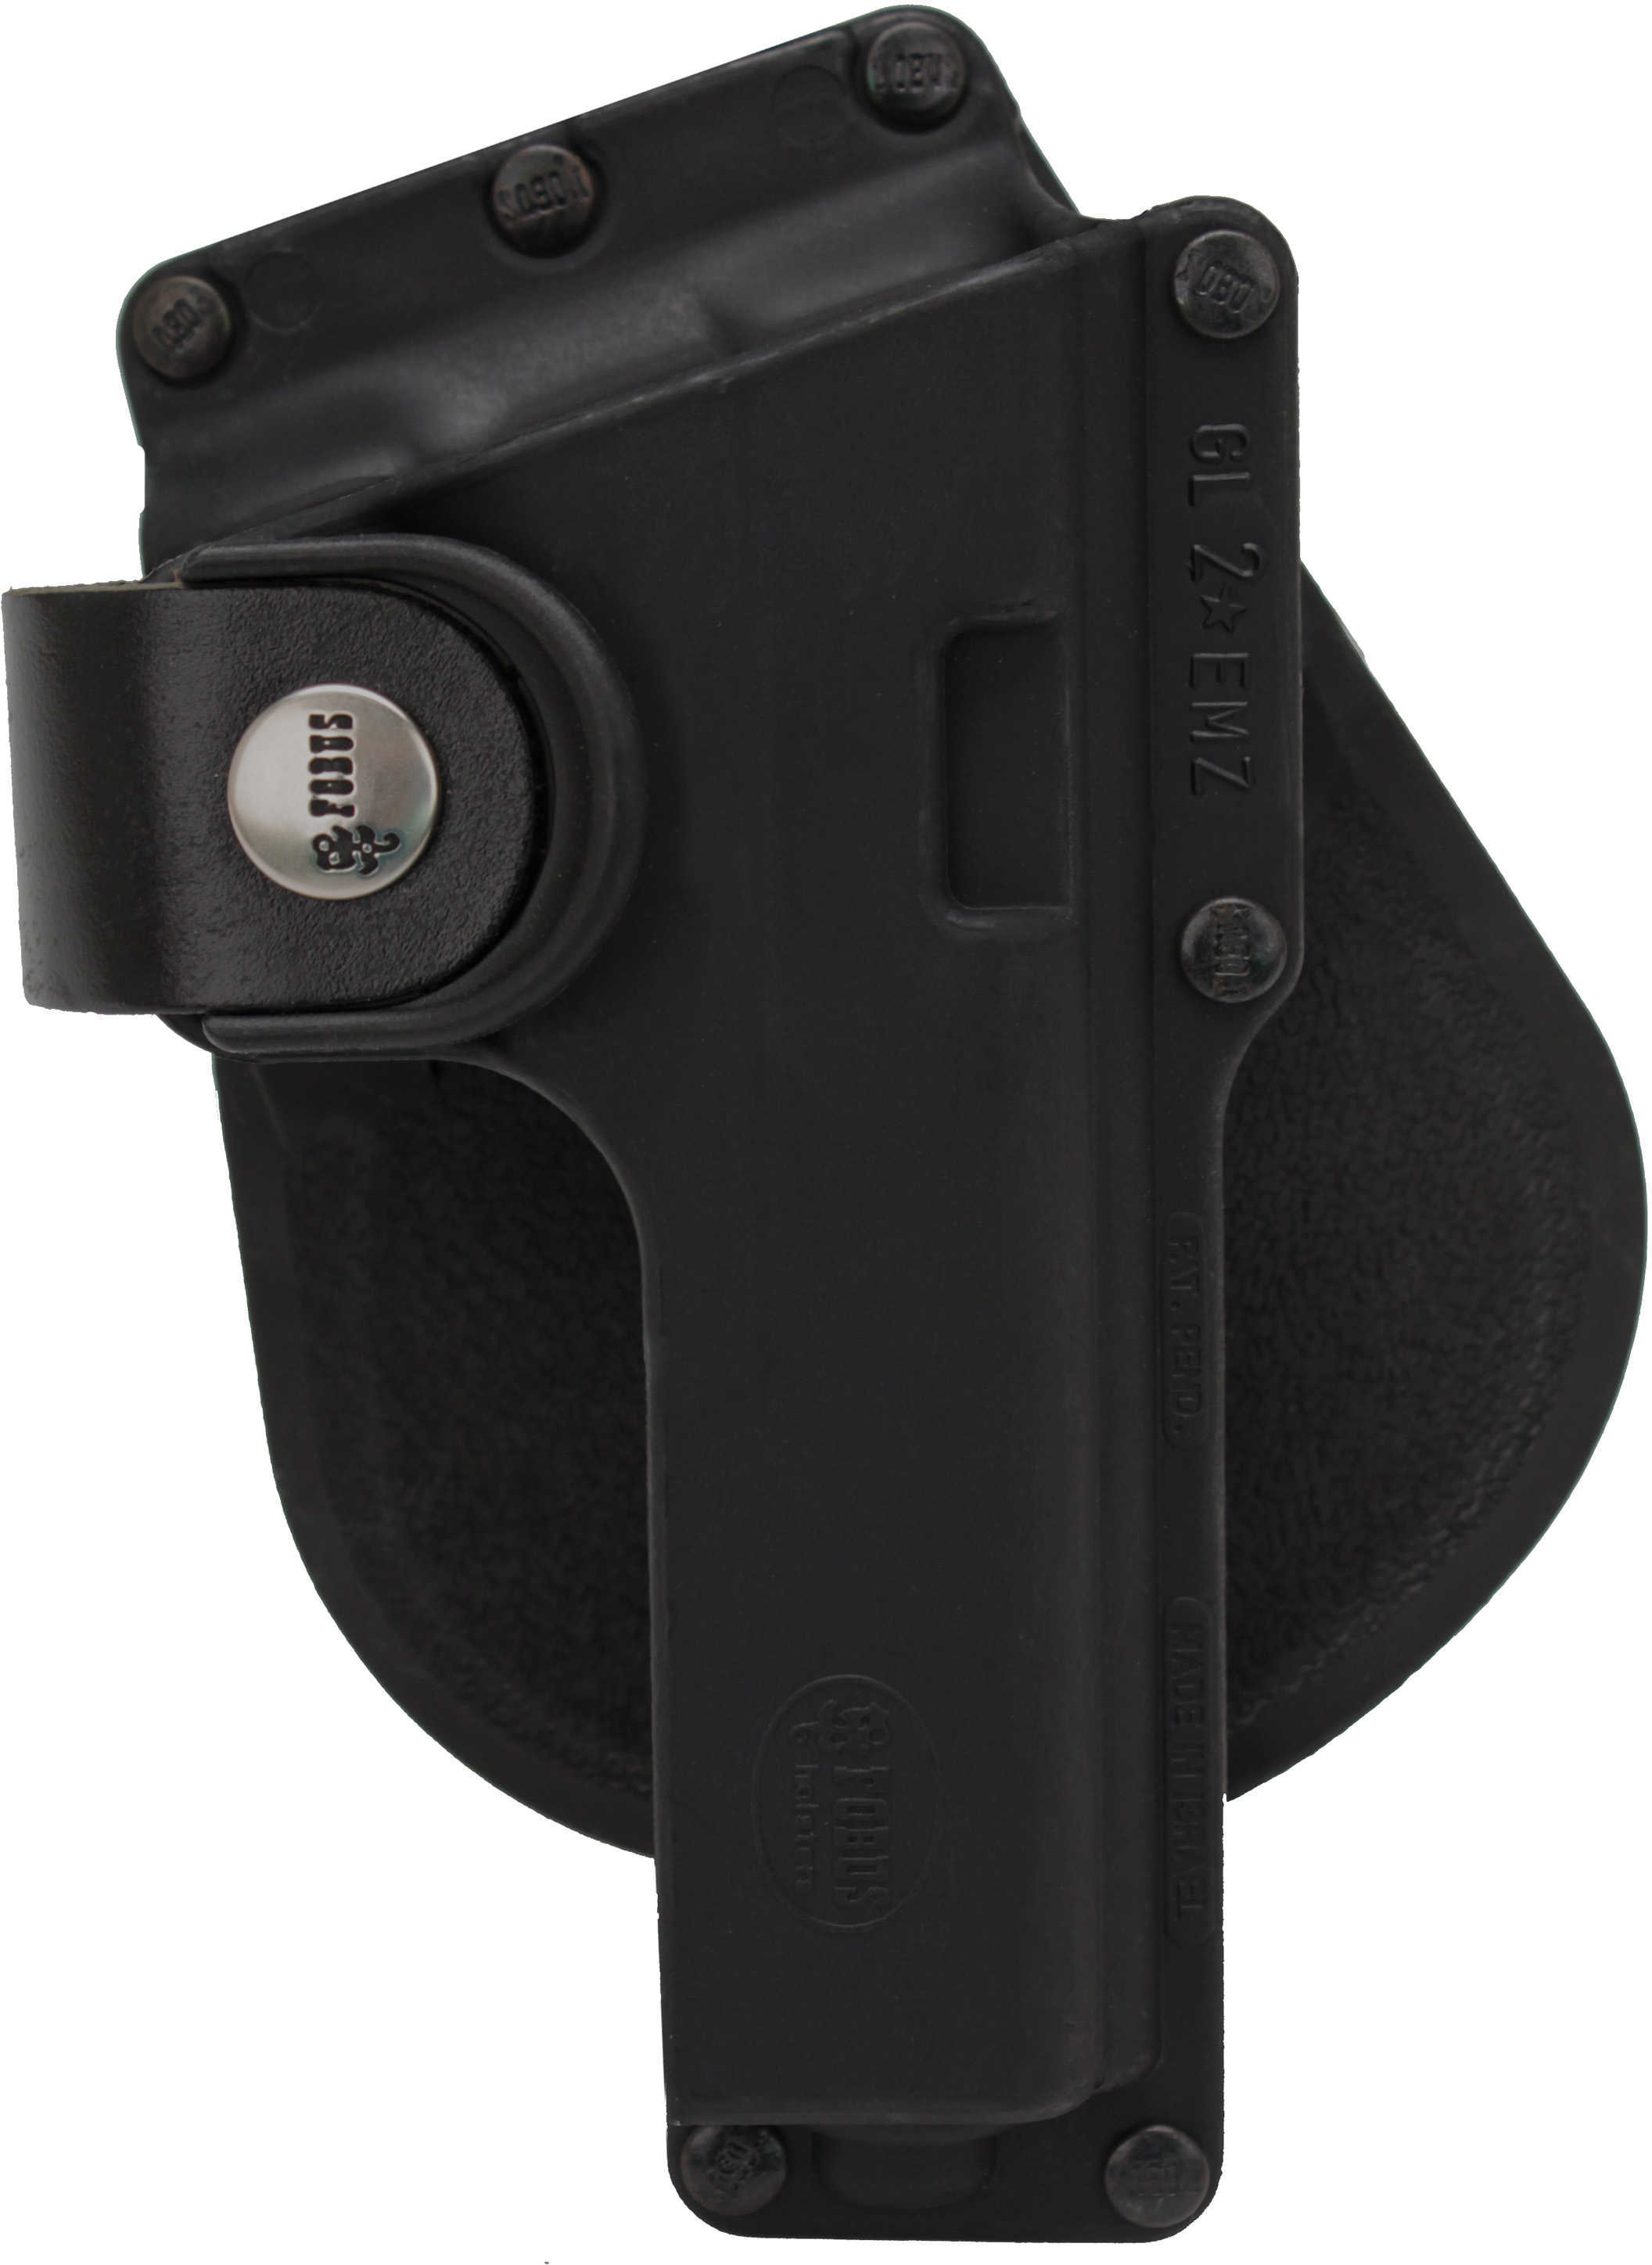 Fobus Paddle Tactical Holster Fits Glock 17/22/31 With Light Or Laser/Ruger American Pistol .45 Full/9mm/.40 Right